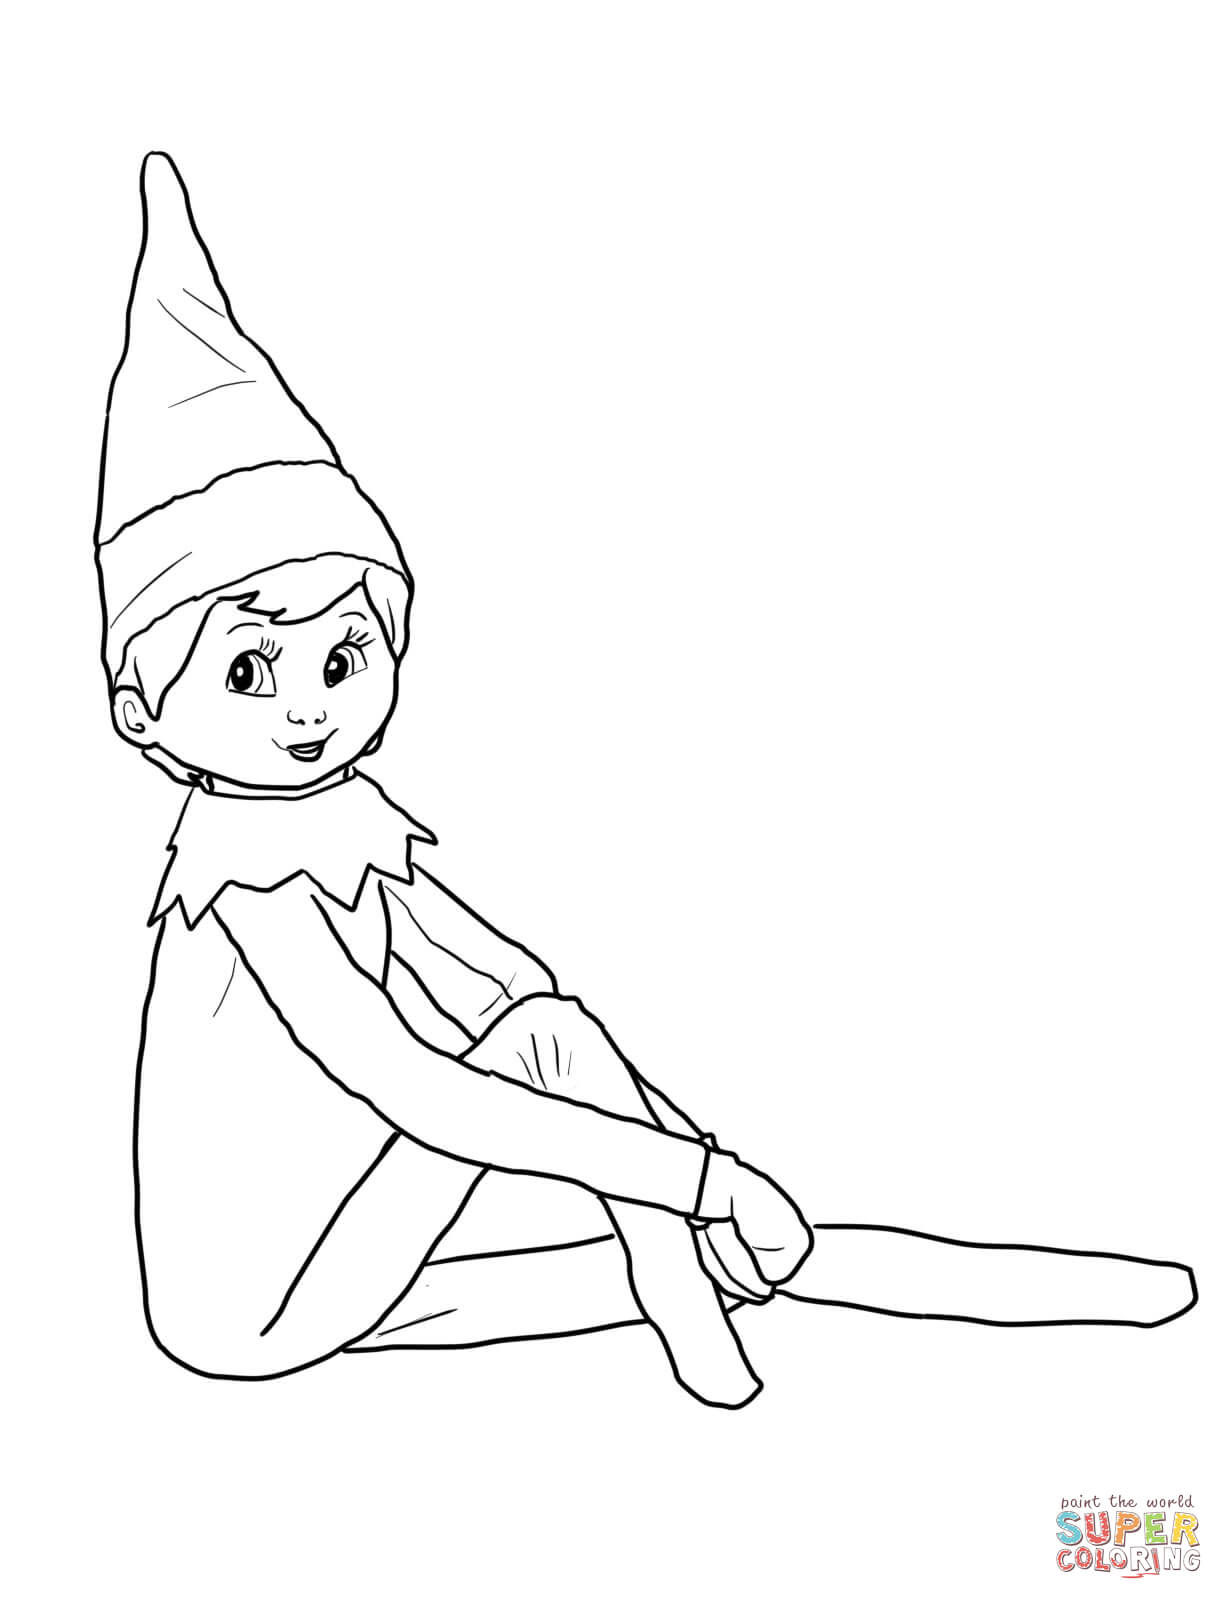 Christmas Elf Coloring Pages Elf On The Shelf Coloring Pages Free Coloring Pages